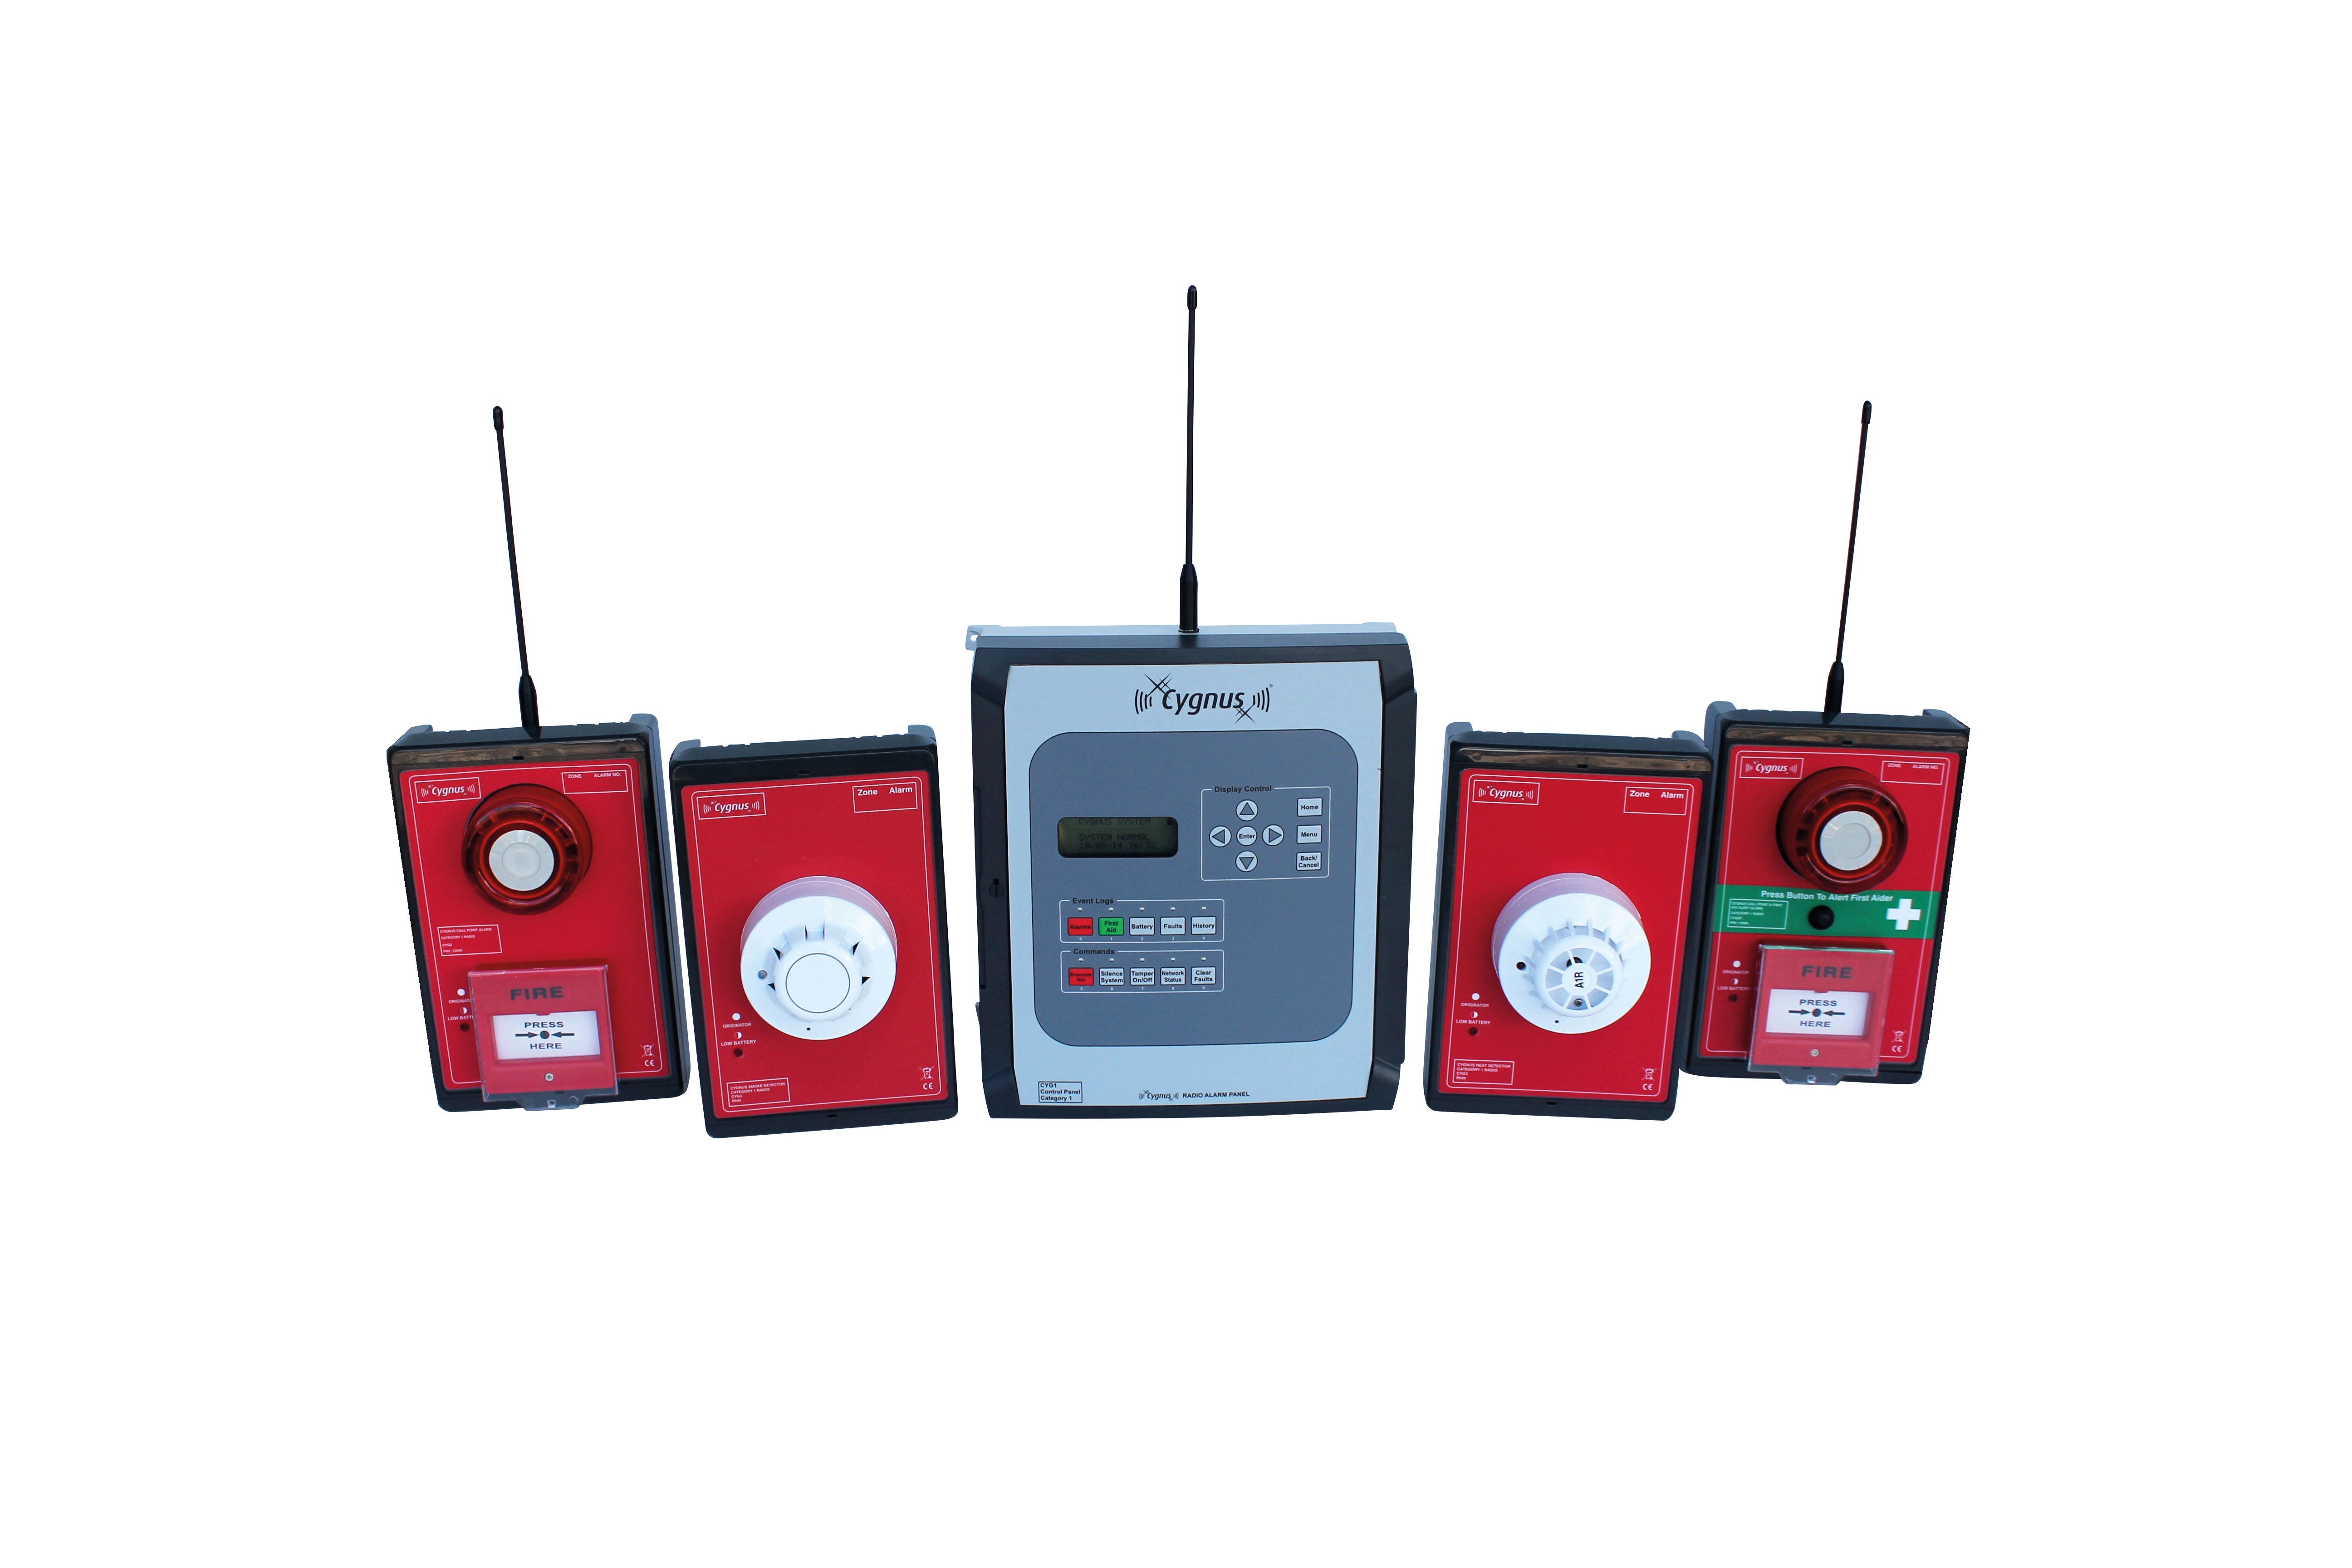 Maximising high-rise fire safety with wireless alarm systems @bullproducts